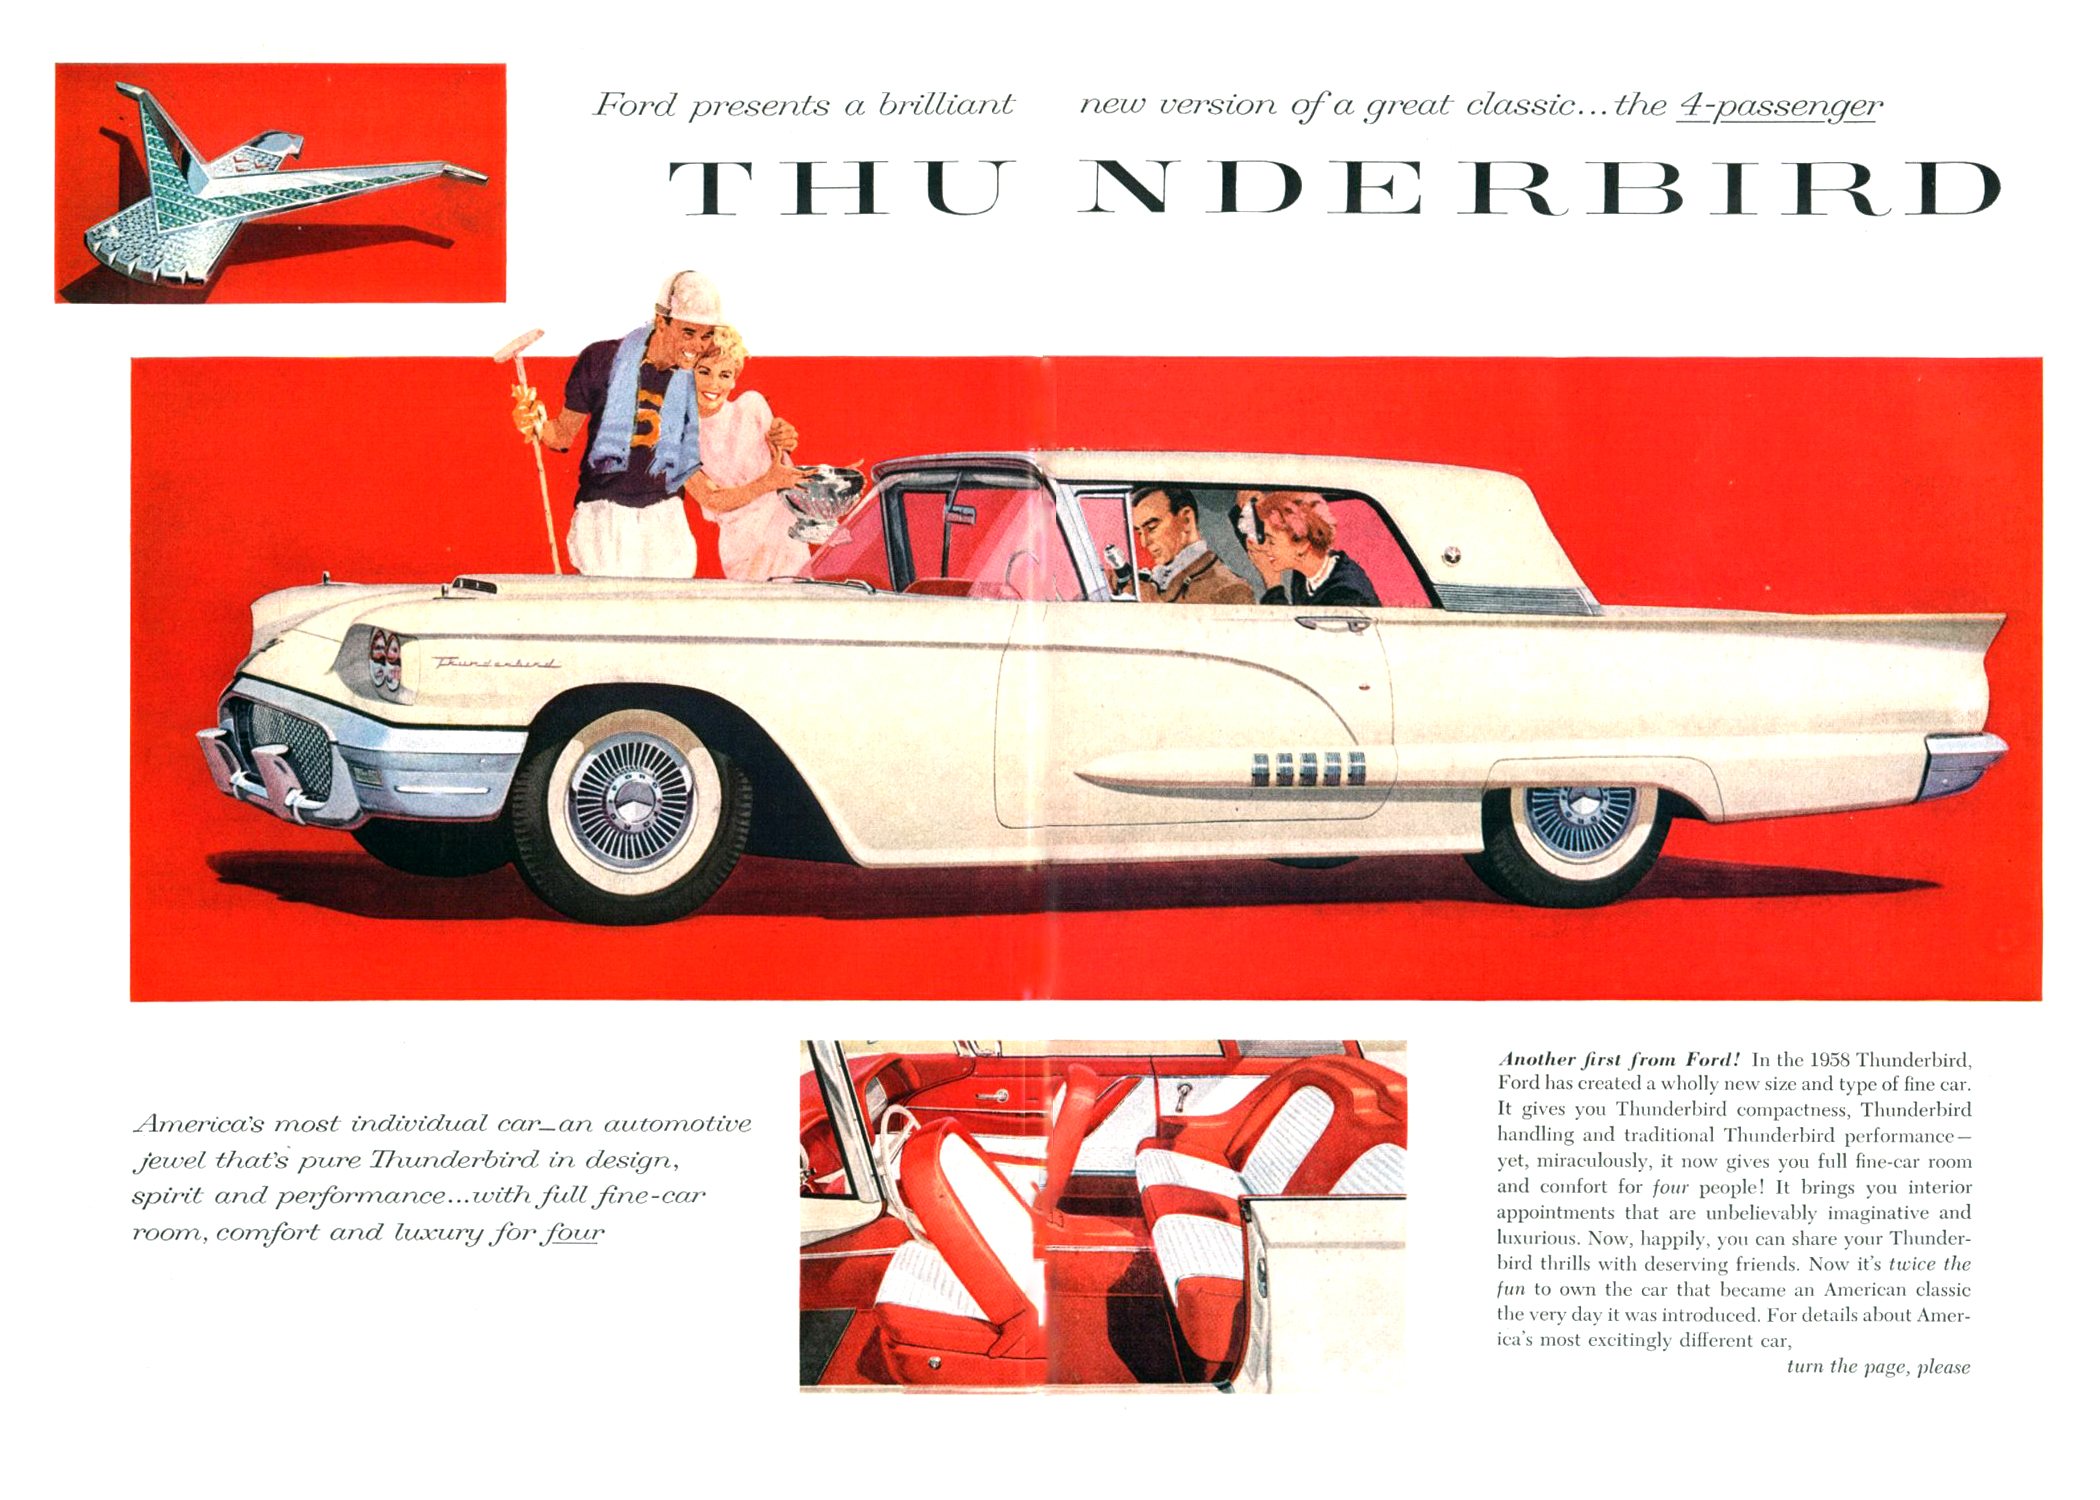 Ford Thunderbird Ad (February–March, 1958) – Ford presents a brilliant new version of a great classic... the 4-passenger Thunderbird